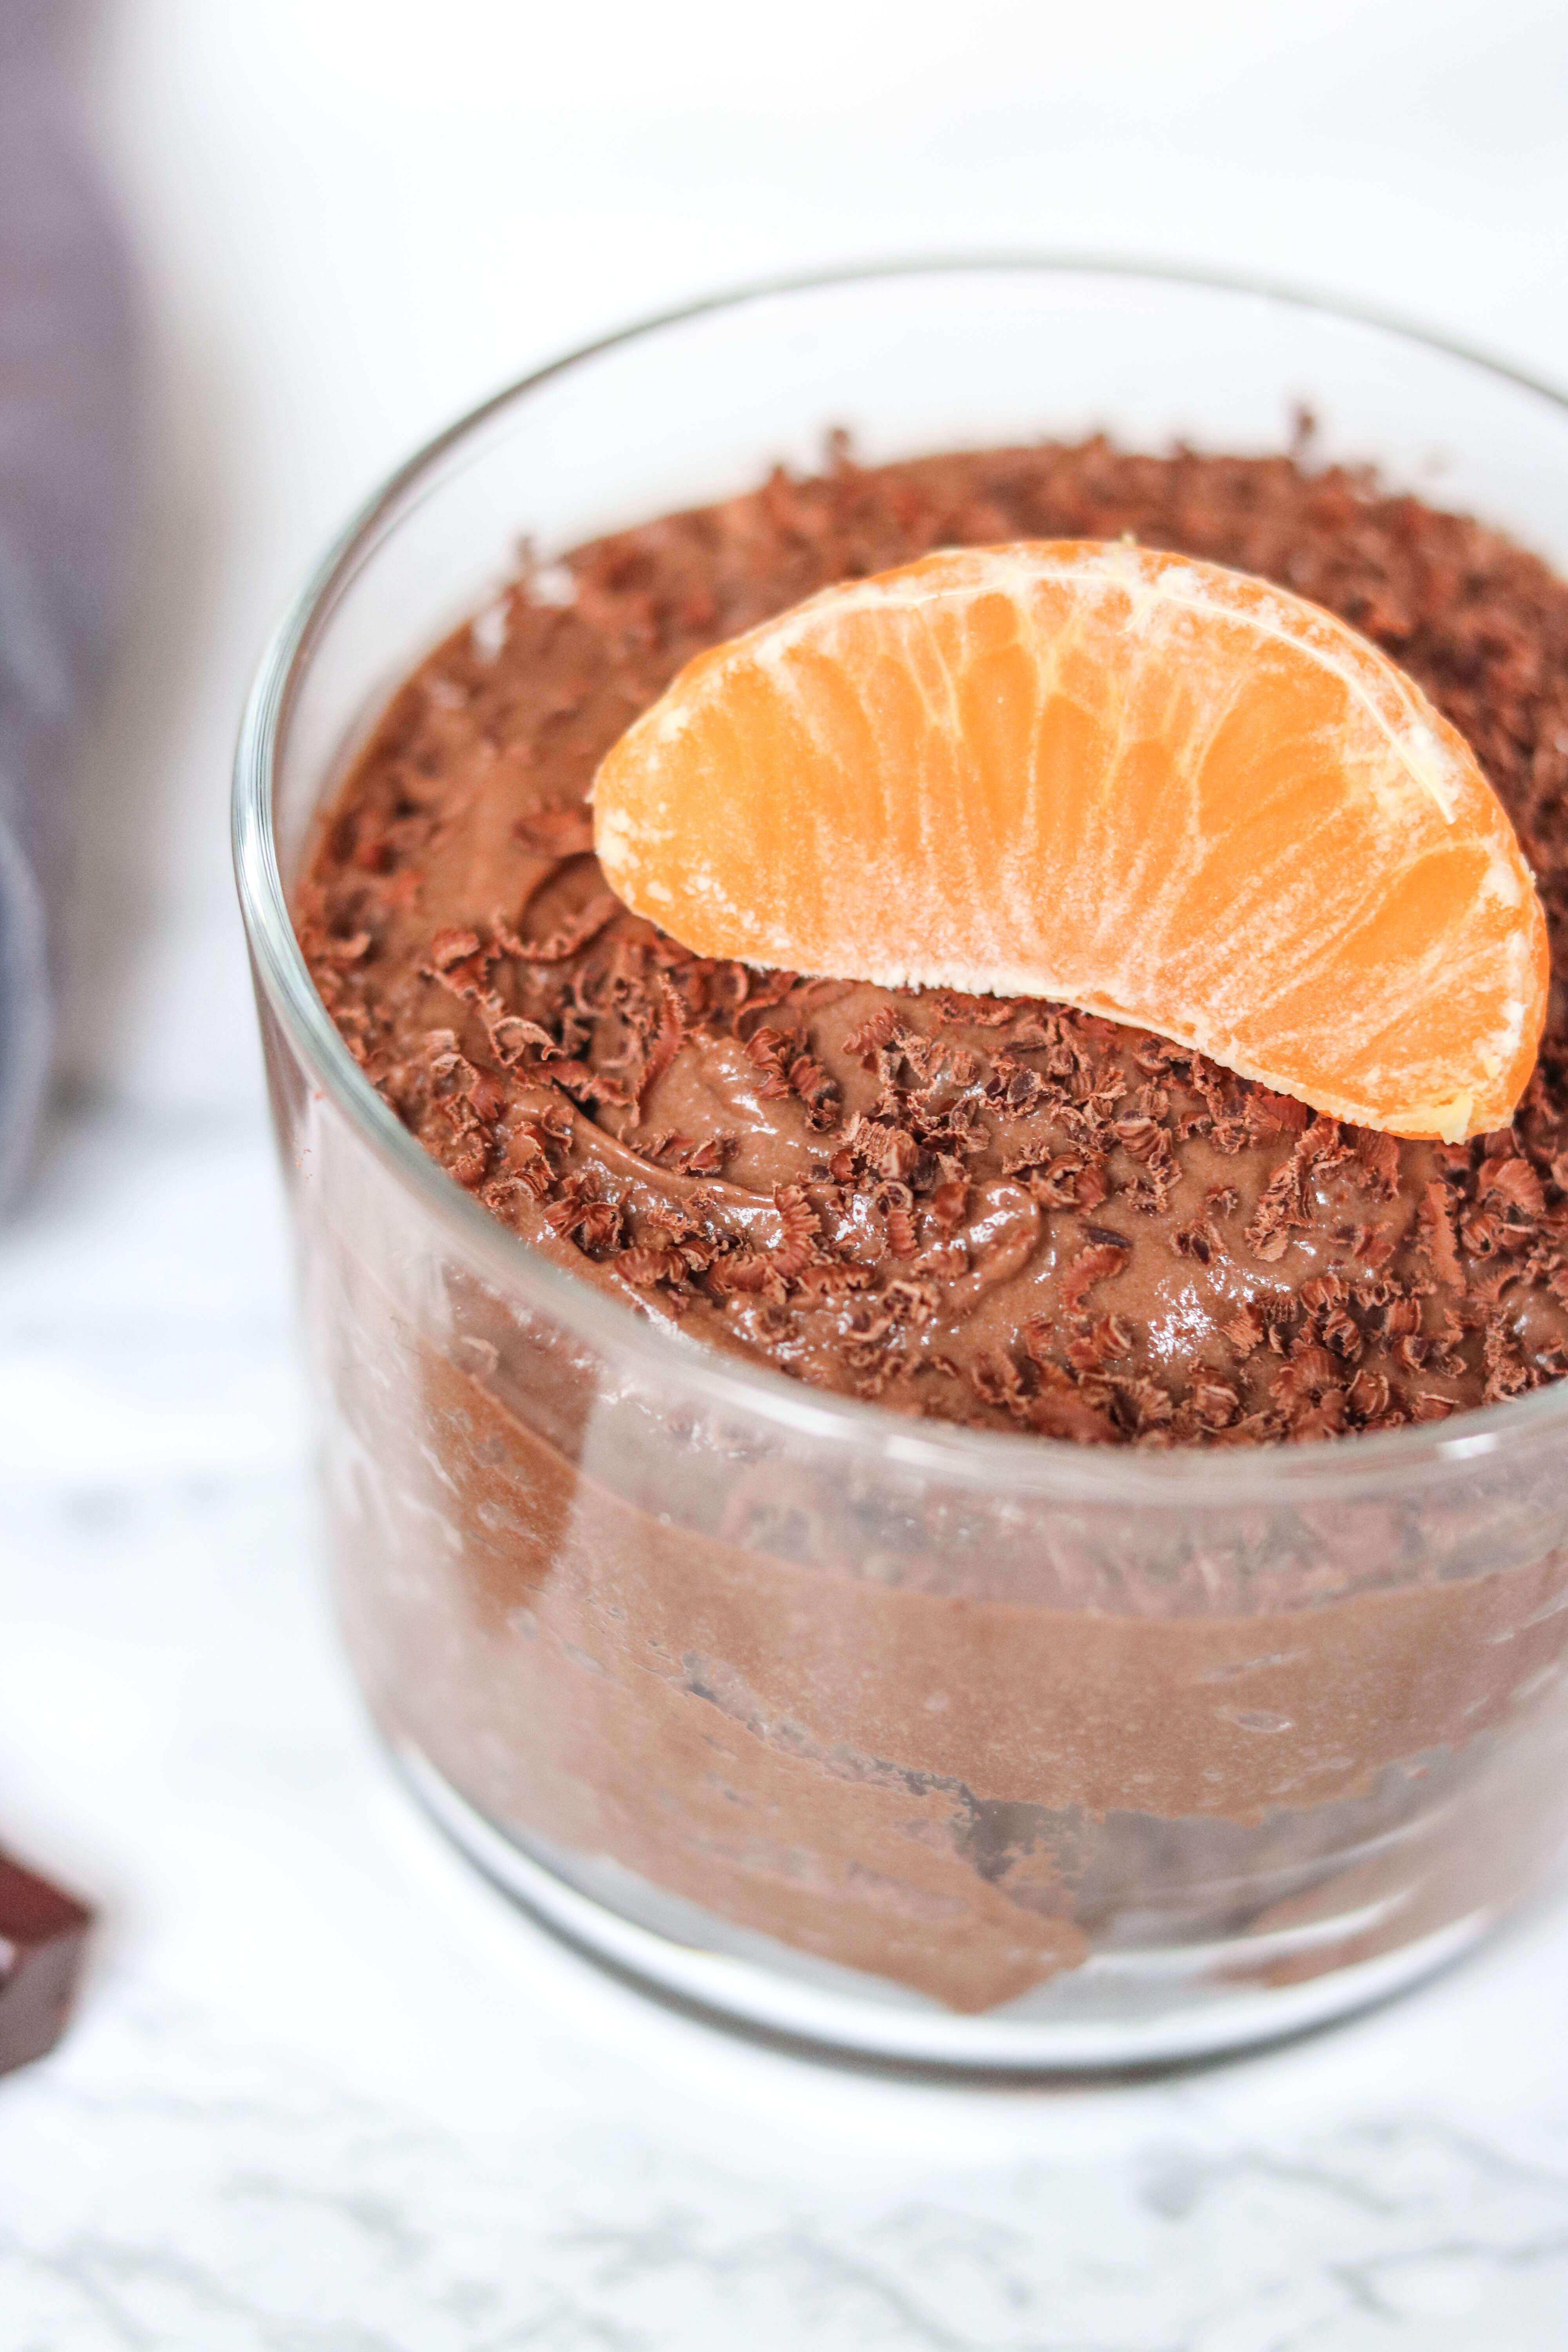 Vegan chocolate orange mousse, a healthy, decadent desert, because you deserve it. It serves 4 but you won't want to share it with anyone.